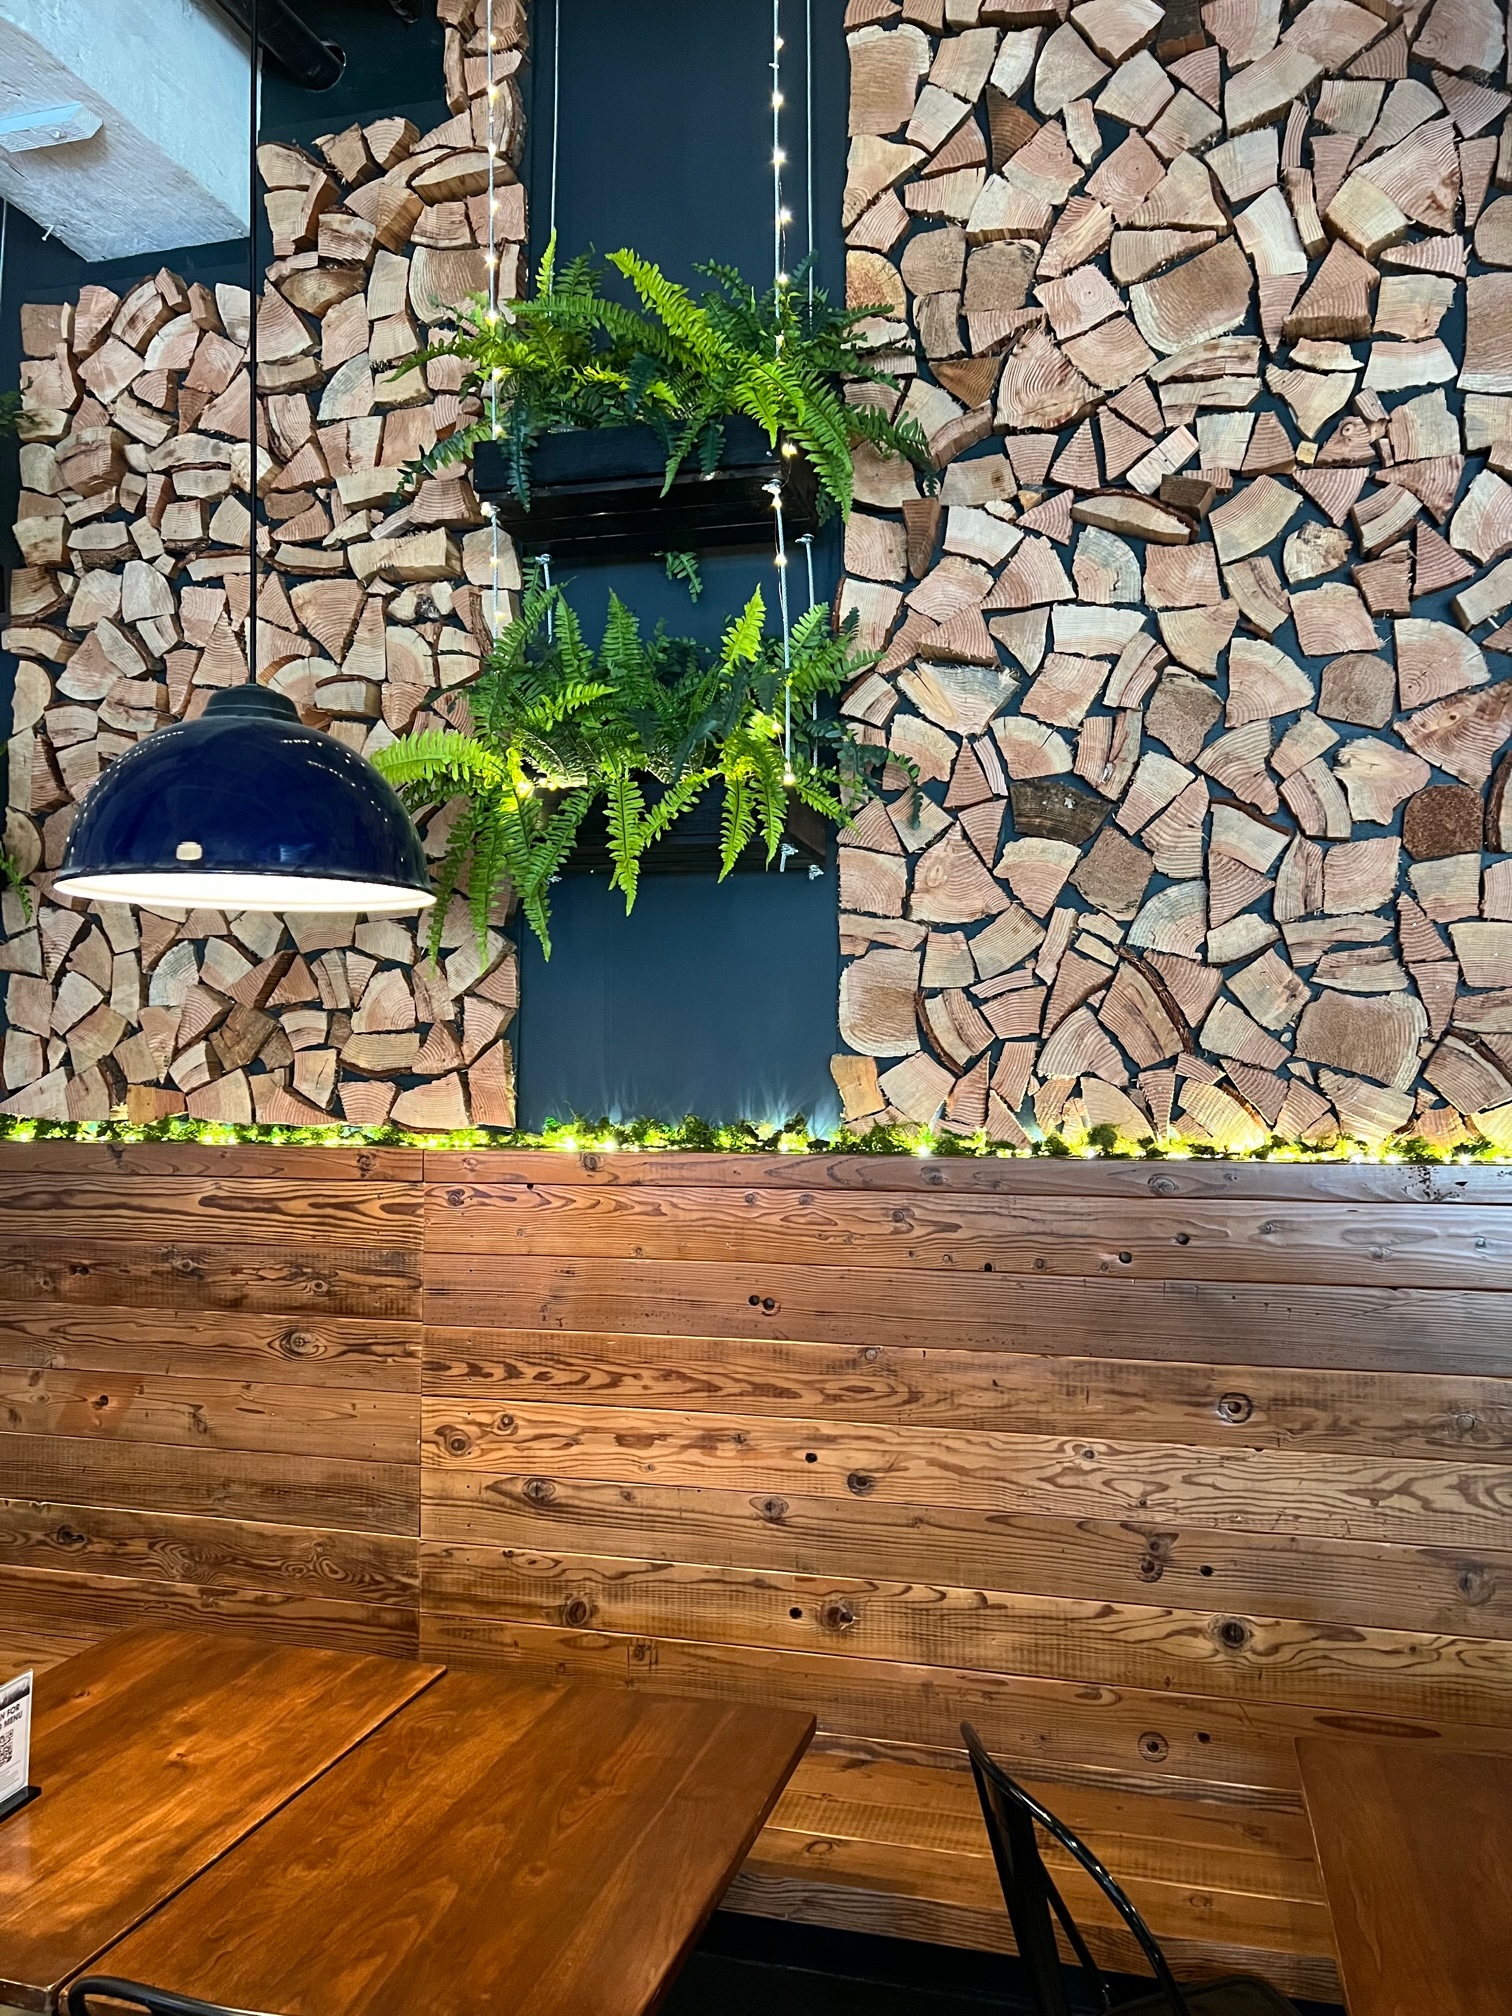 The lower wood panels are salvaged from Sunshine Dairy while the cut wood logs are from Whitney Burnside's father's property on Whidbey Island.